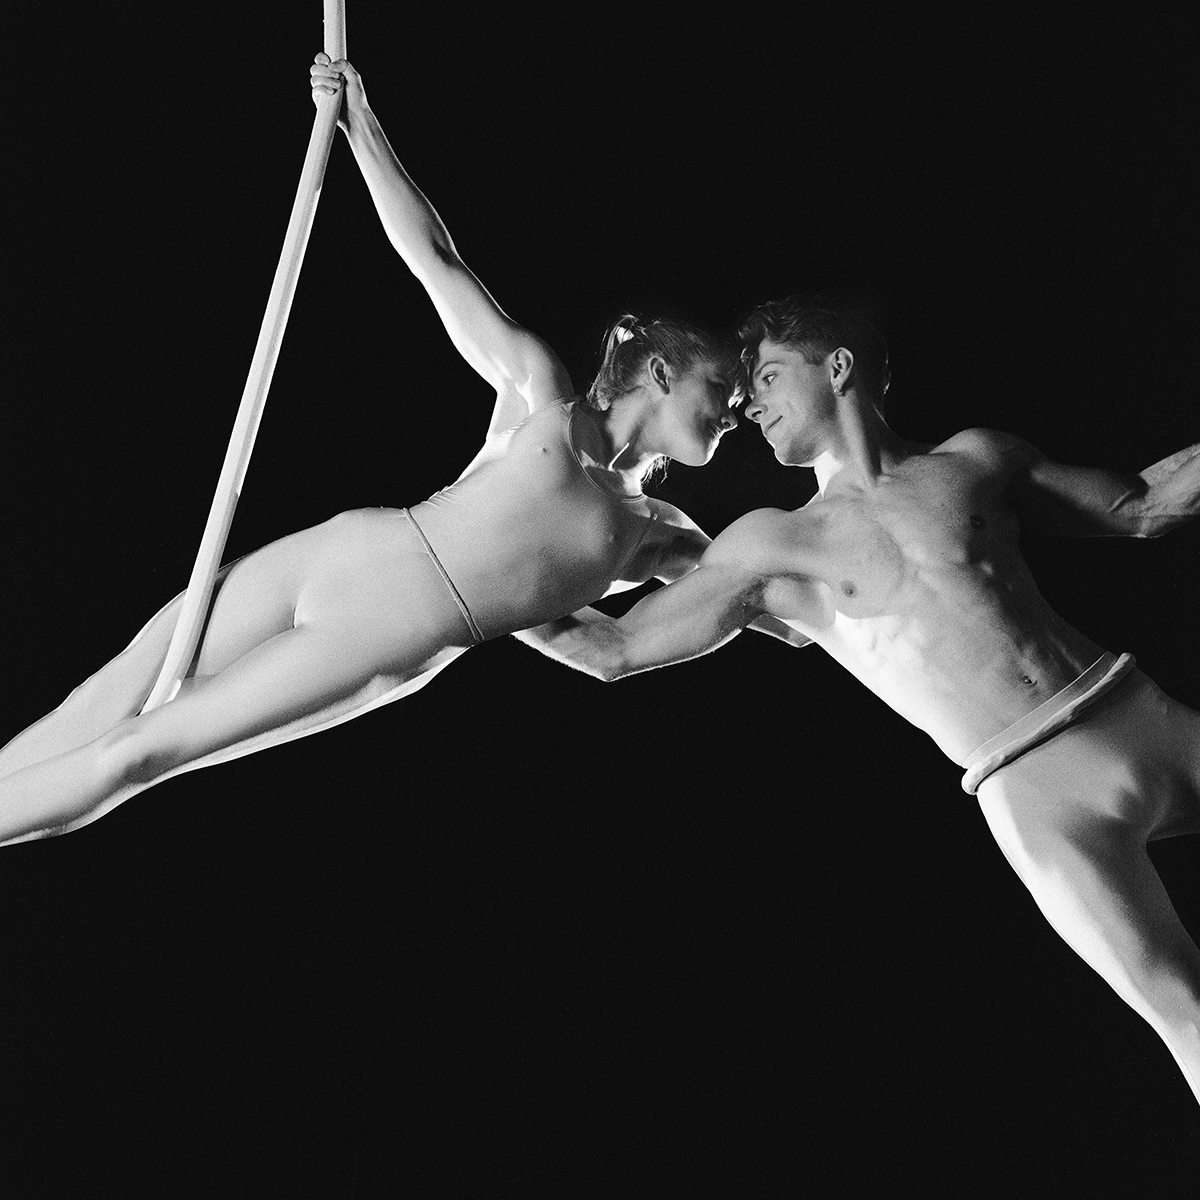 Jackie Williams and Andrew Watson on rope 2